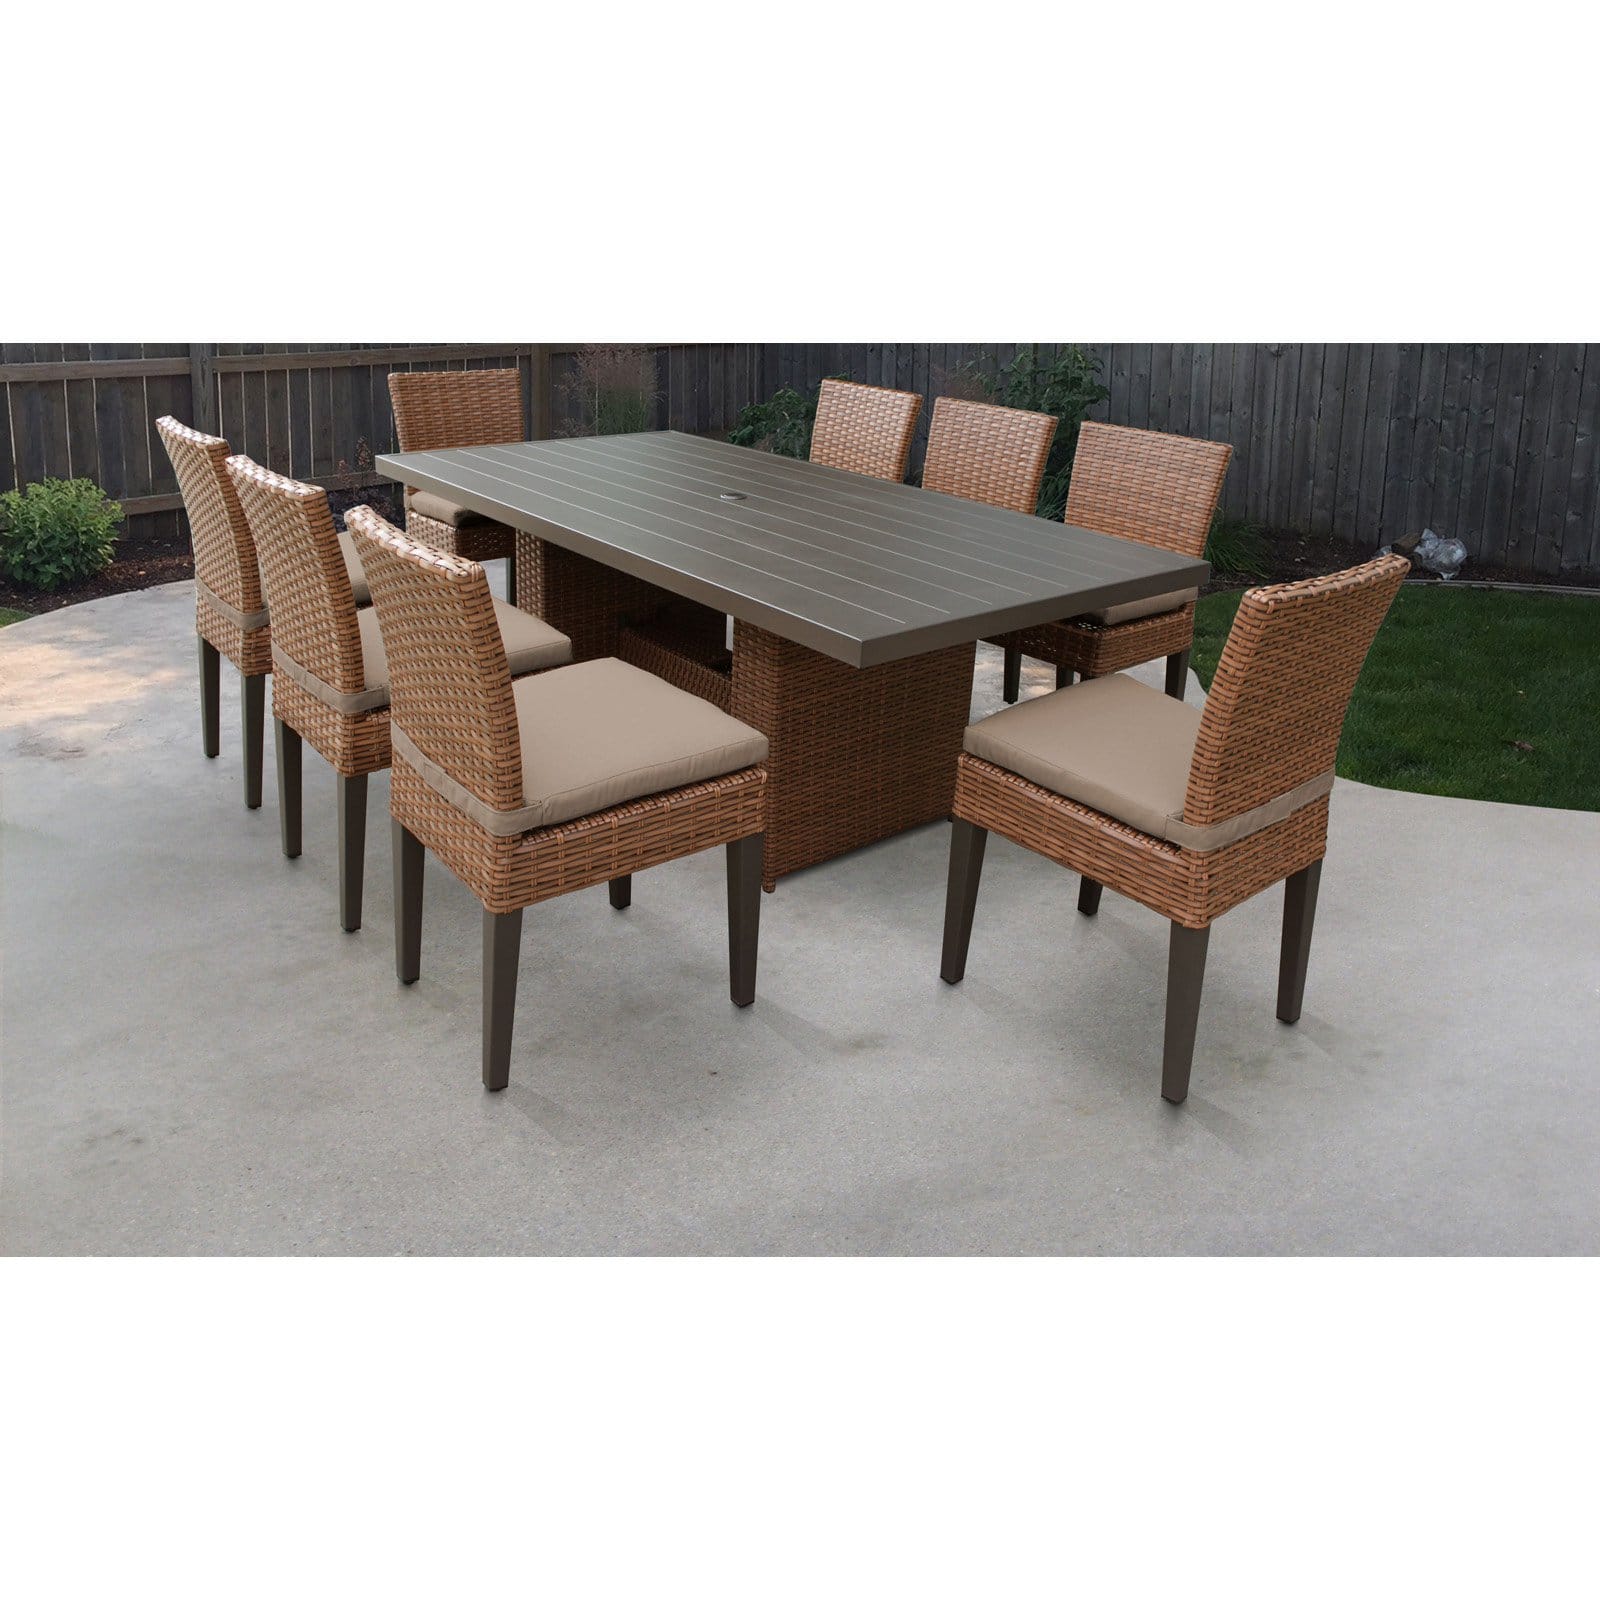 TK Classics Laguna Wicker 9 Piece Patio Dining Set with Armless Chairs - image 3 of 3